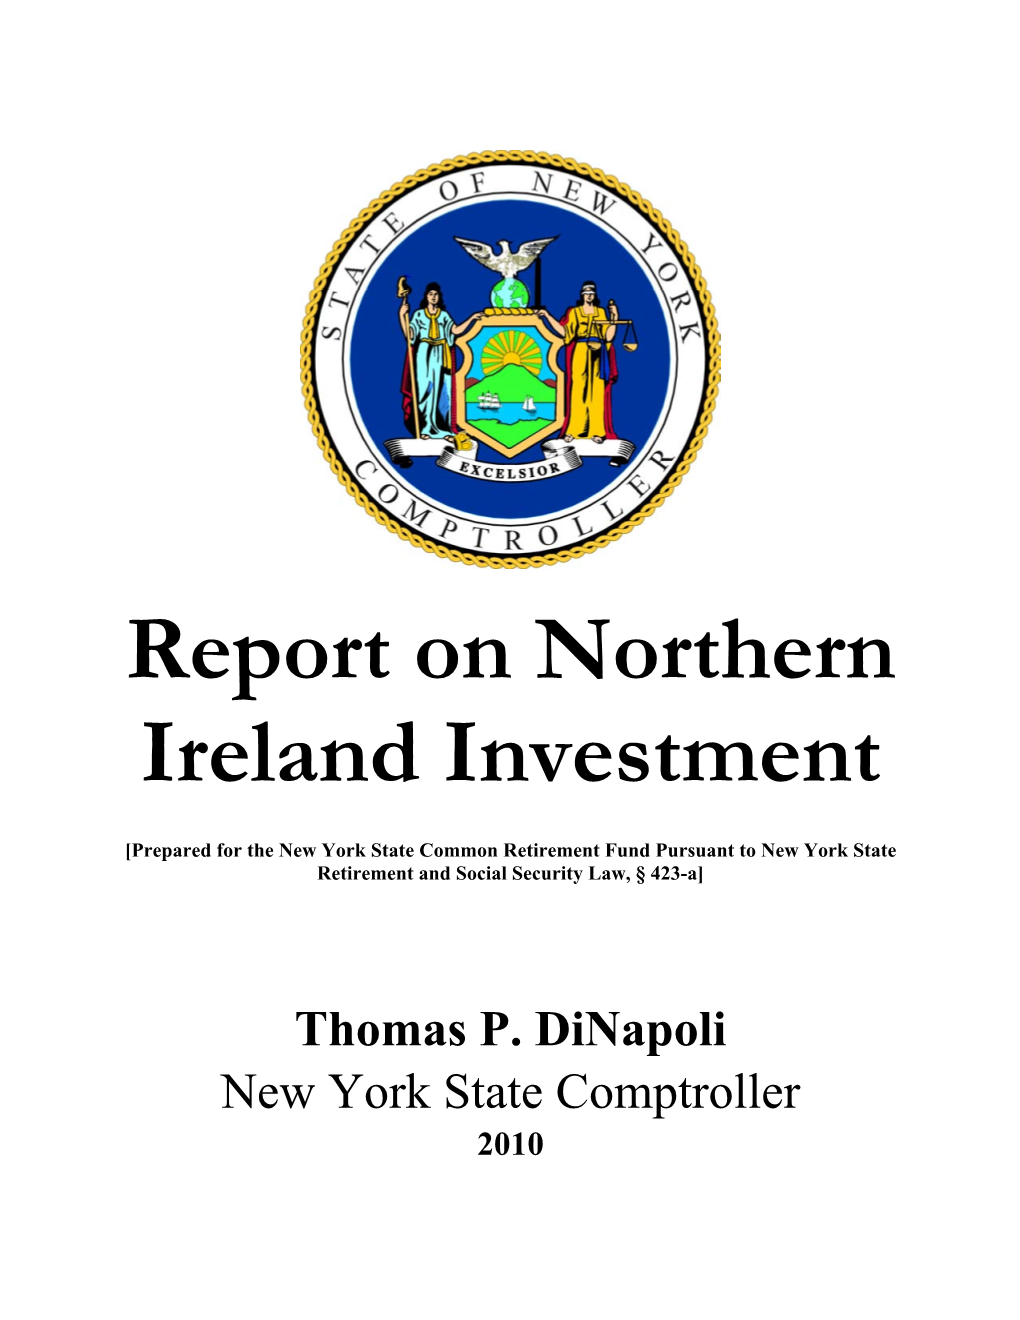 Report on Northern Ireland Investment